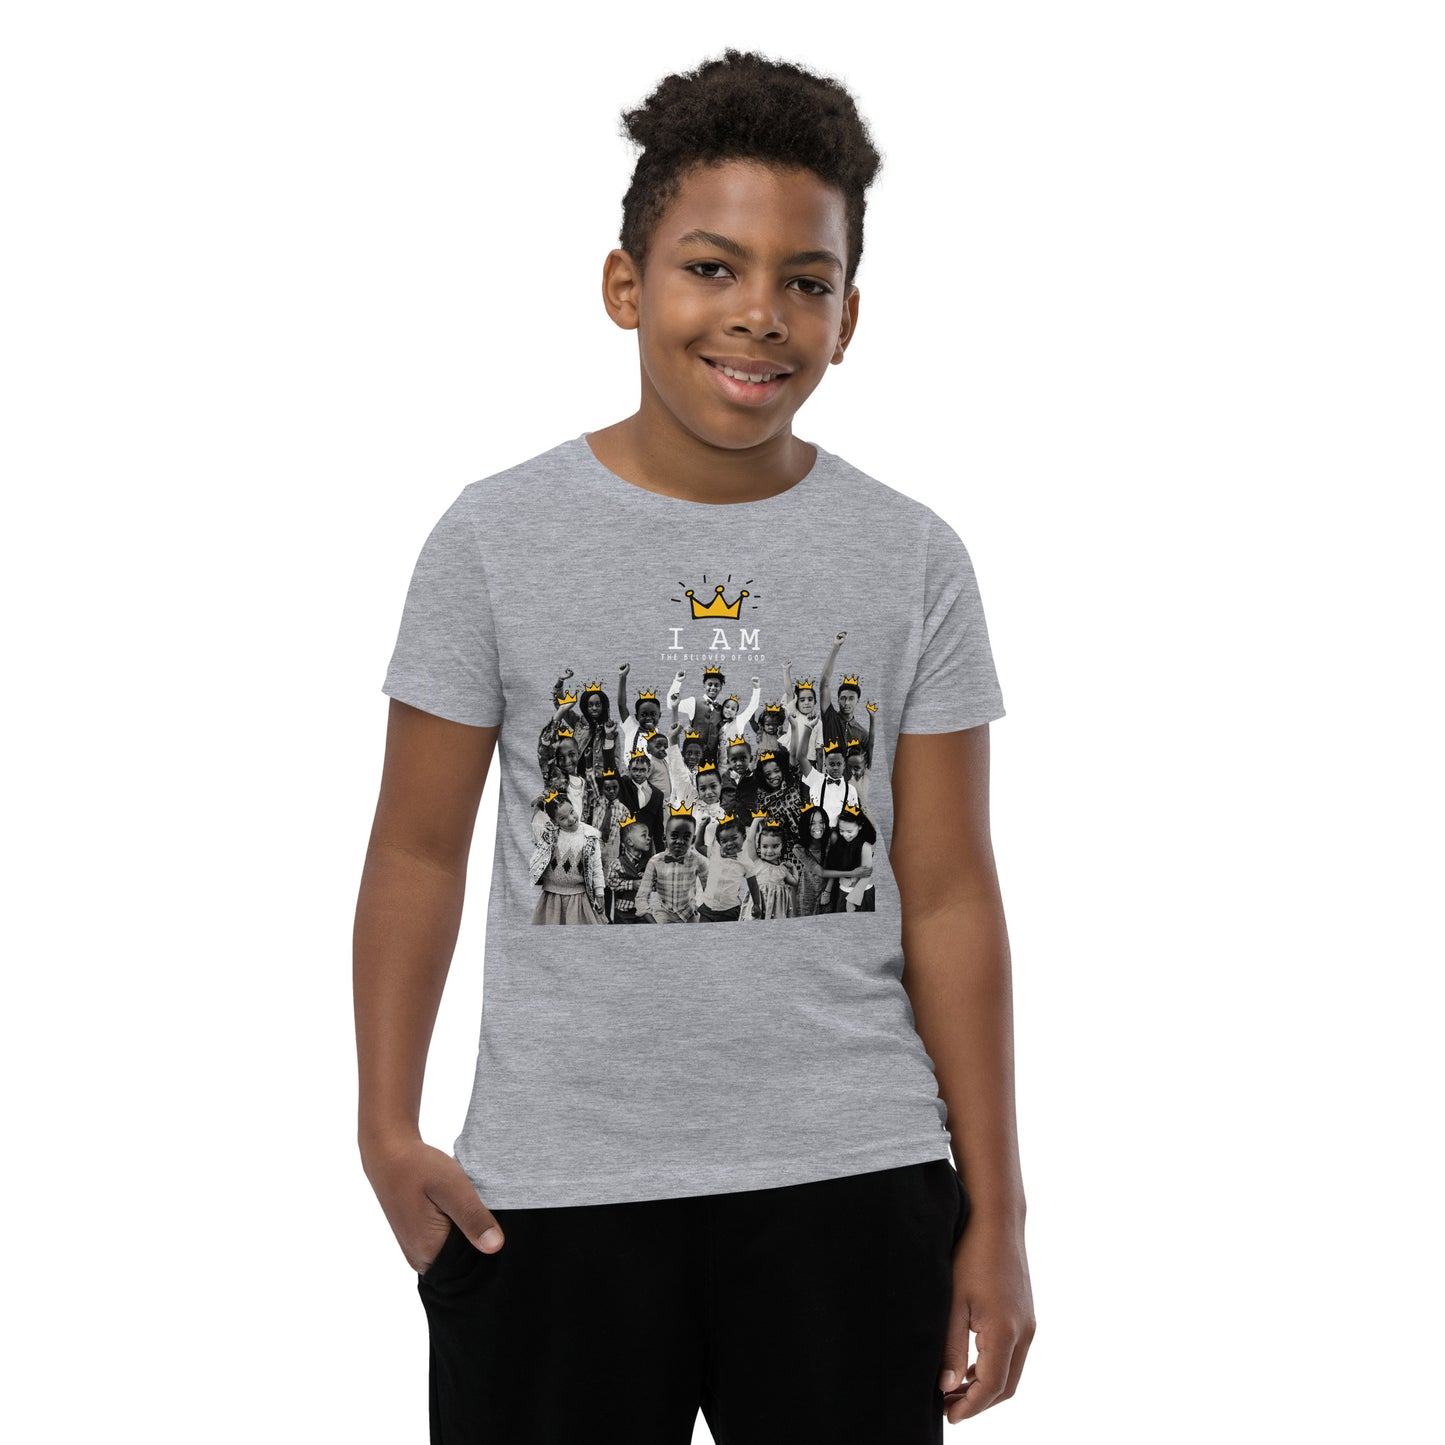 I AM: A to Z Youth Short Sleeve T-Shirt